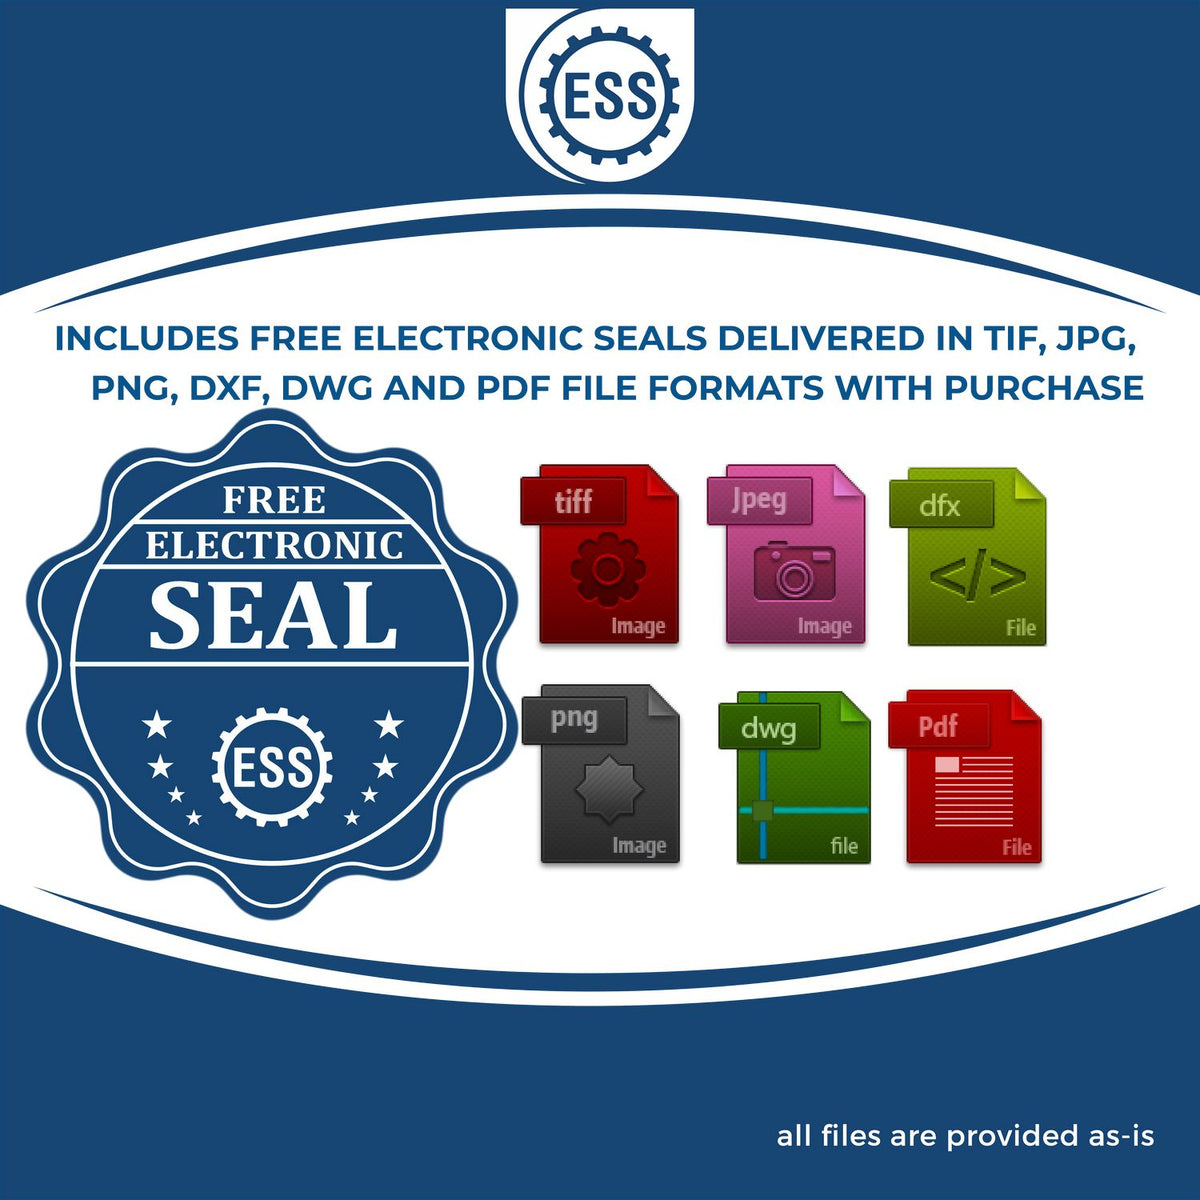 An infographic for the free electronic seal for the Heavy Duty Cast Iron Oregon Geologist Seal Embosser illustrating the different file type icons such as DXF, DWG, TIF, JPG and PNG.